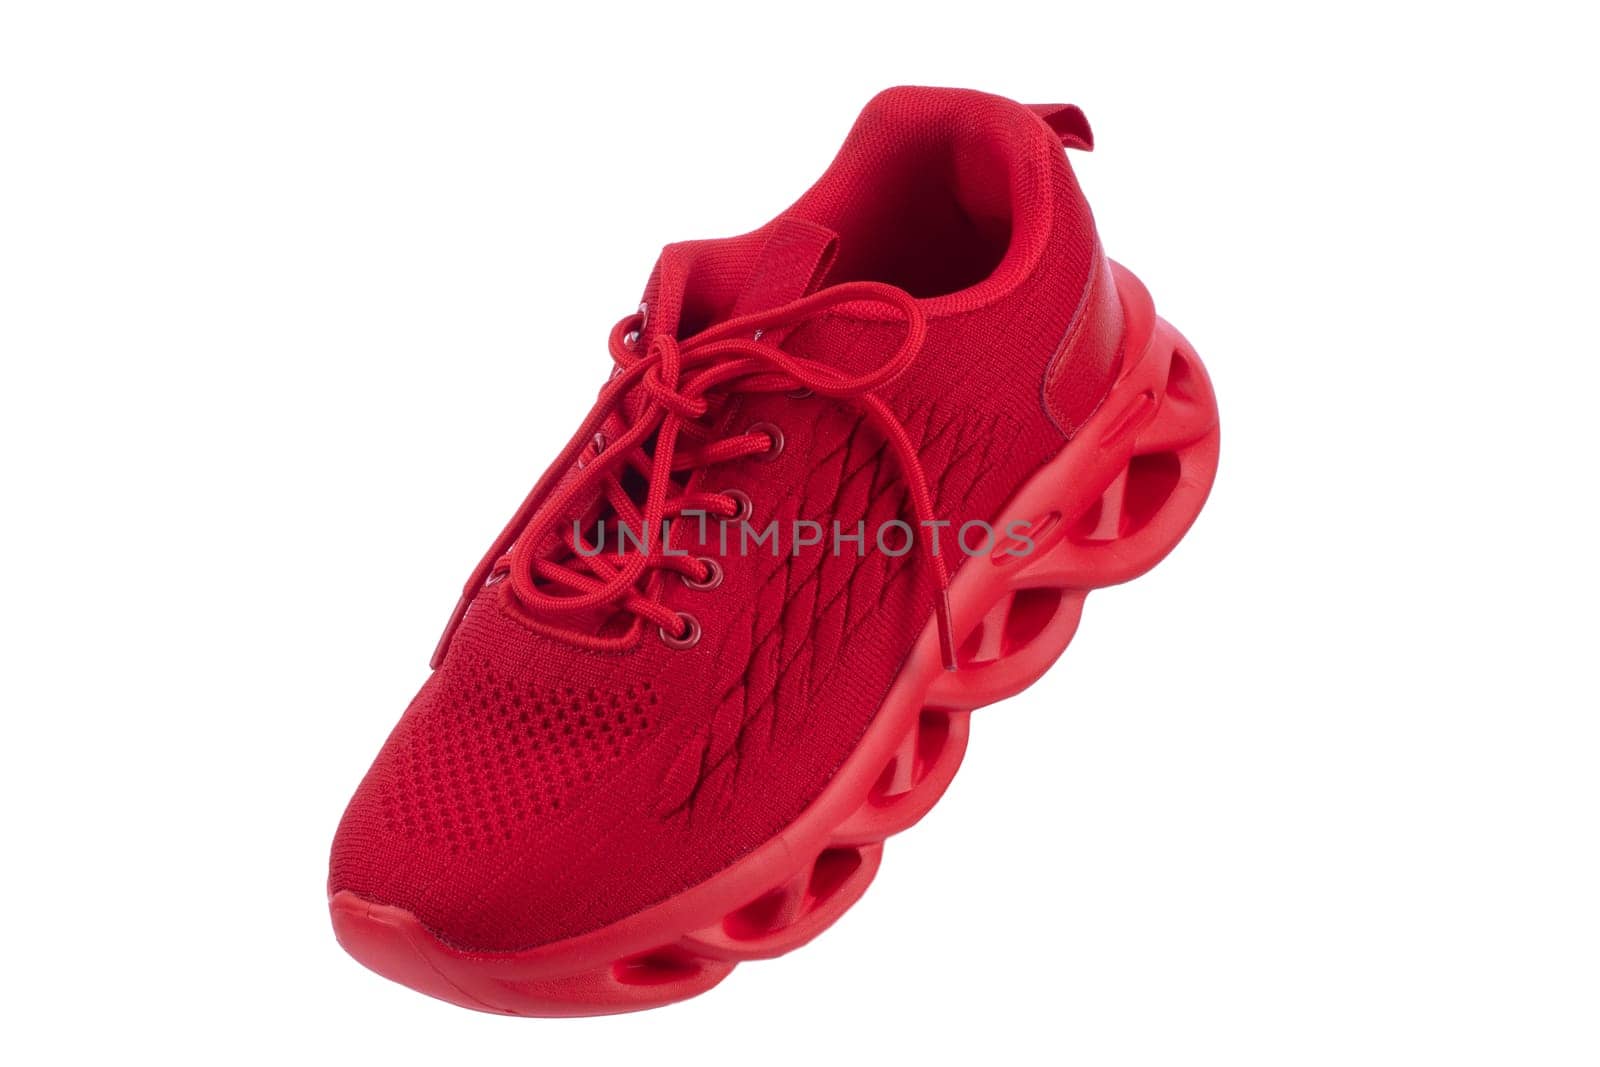 Red sneaker made of fabric on a white background. Sport shoes.